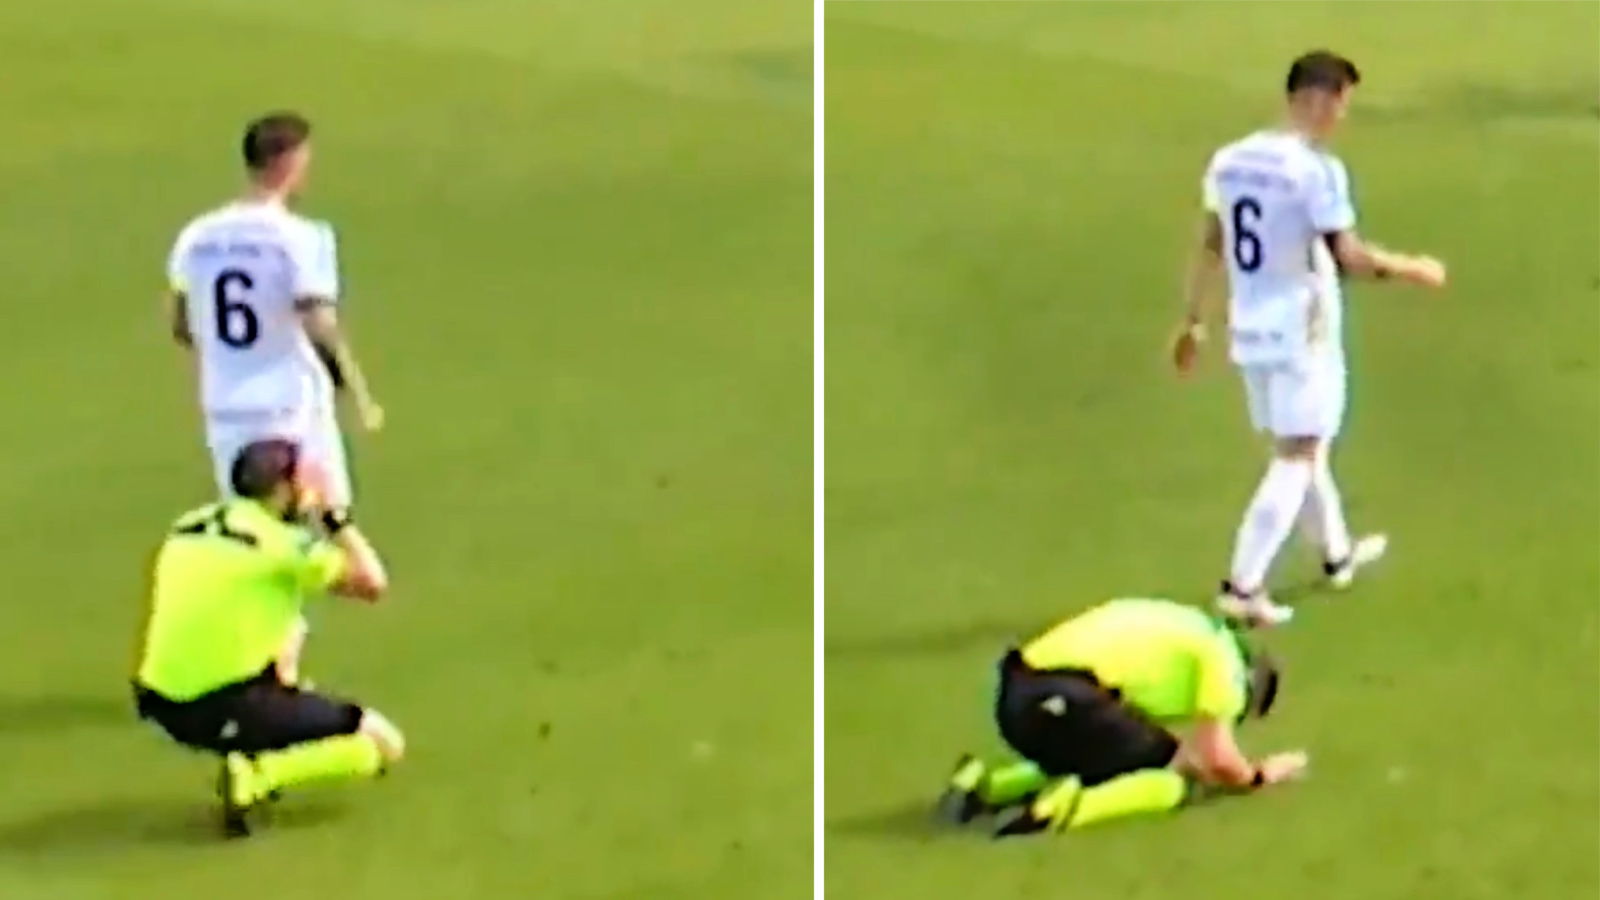 Twitter reacts to Danish referee’s honest reaction after failing to play advantage